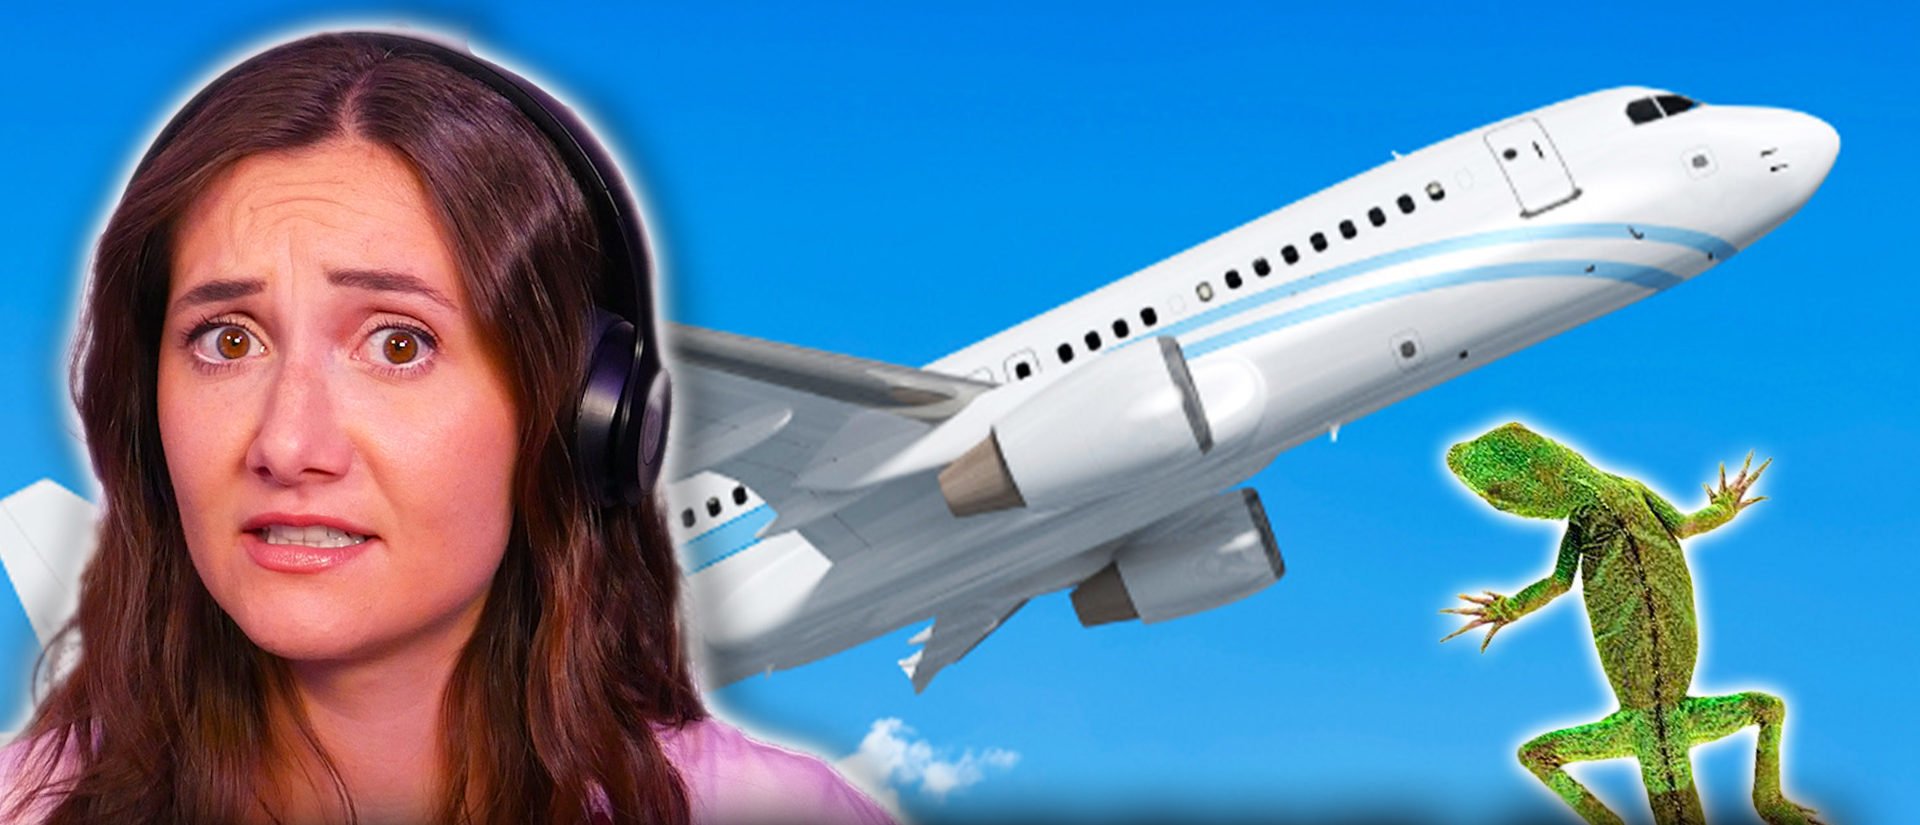 Woman Freaks Out Over ‘Reptilian Man’ On Plane The Daily Caller